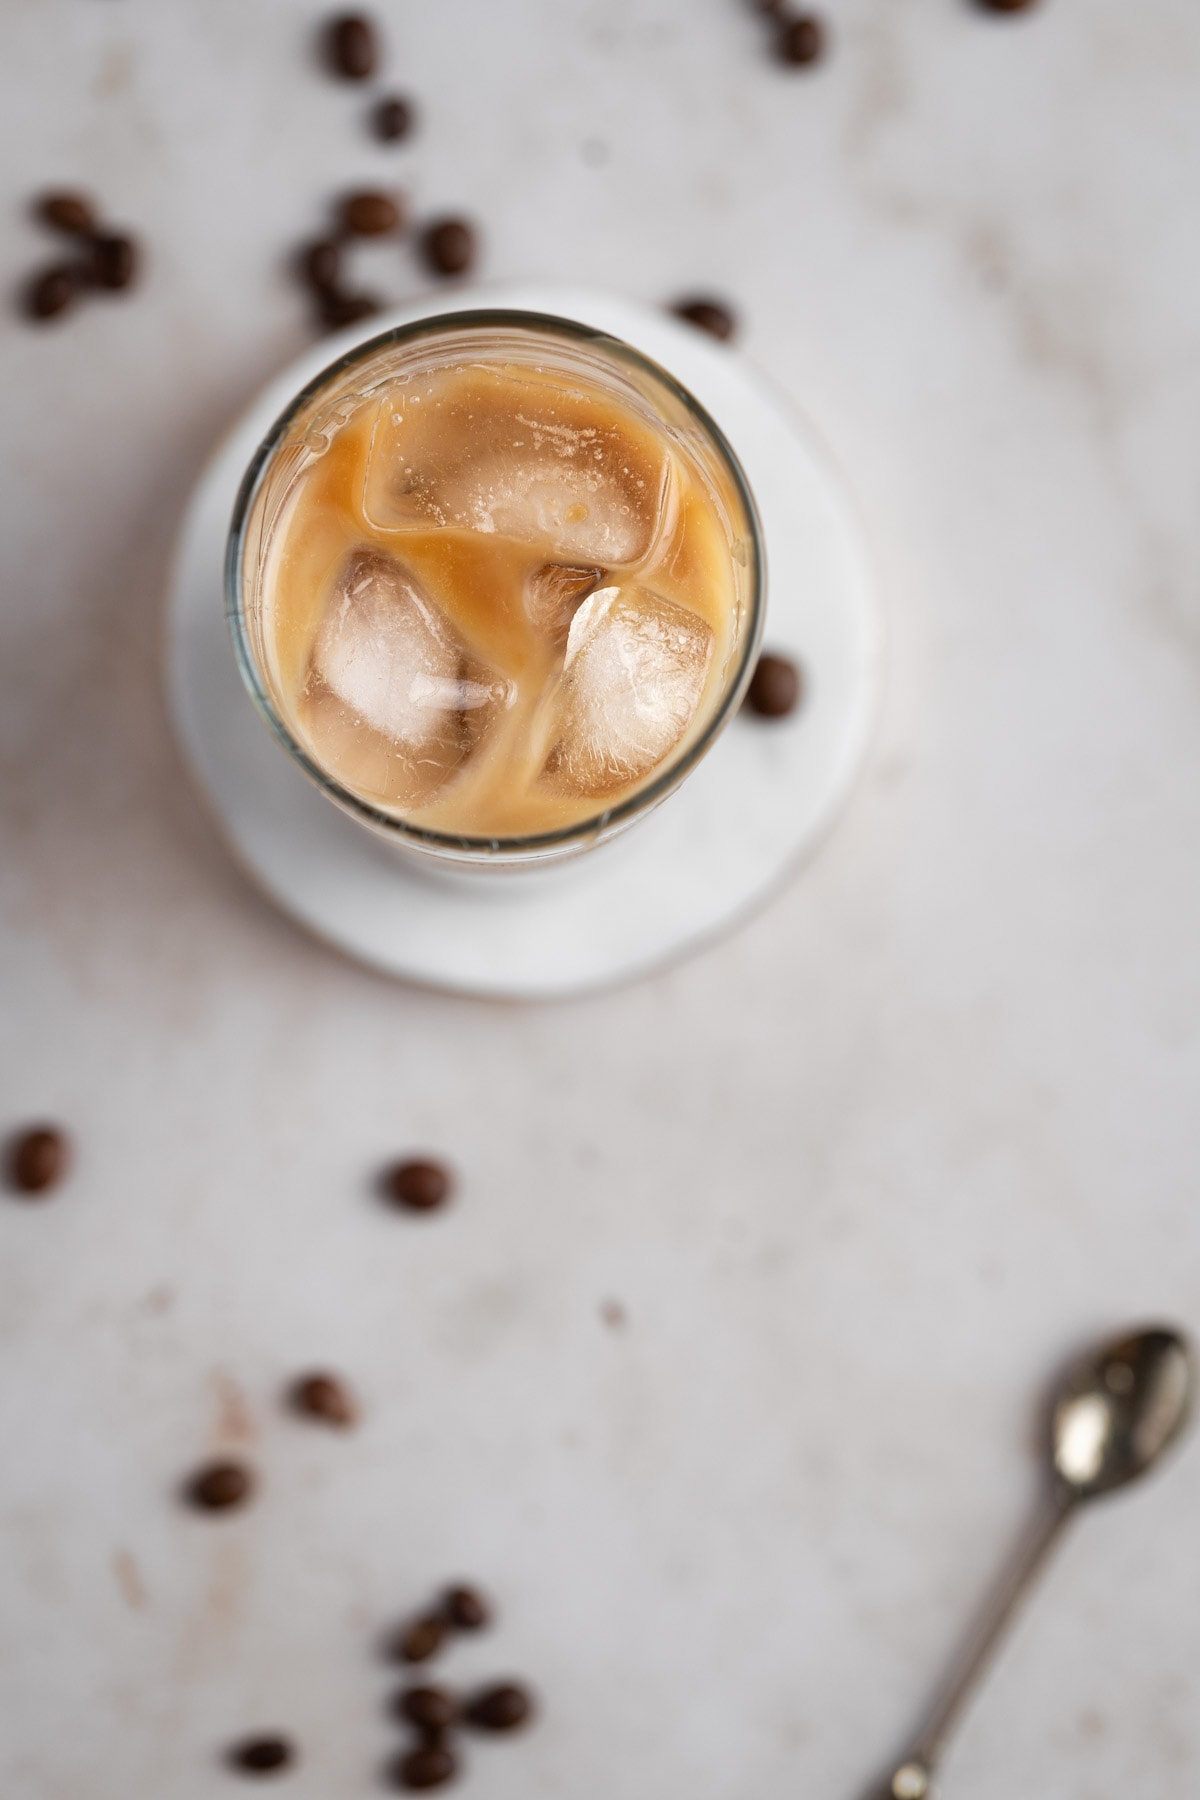 Overhead view of an iced caramel coffee on a white marble table.